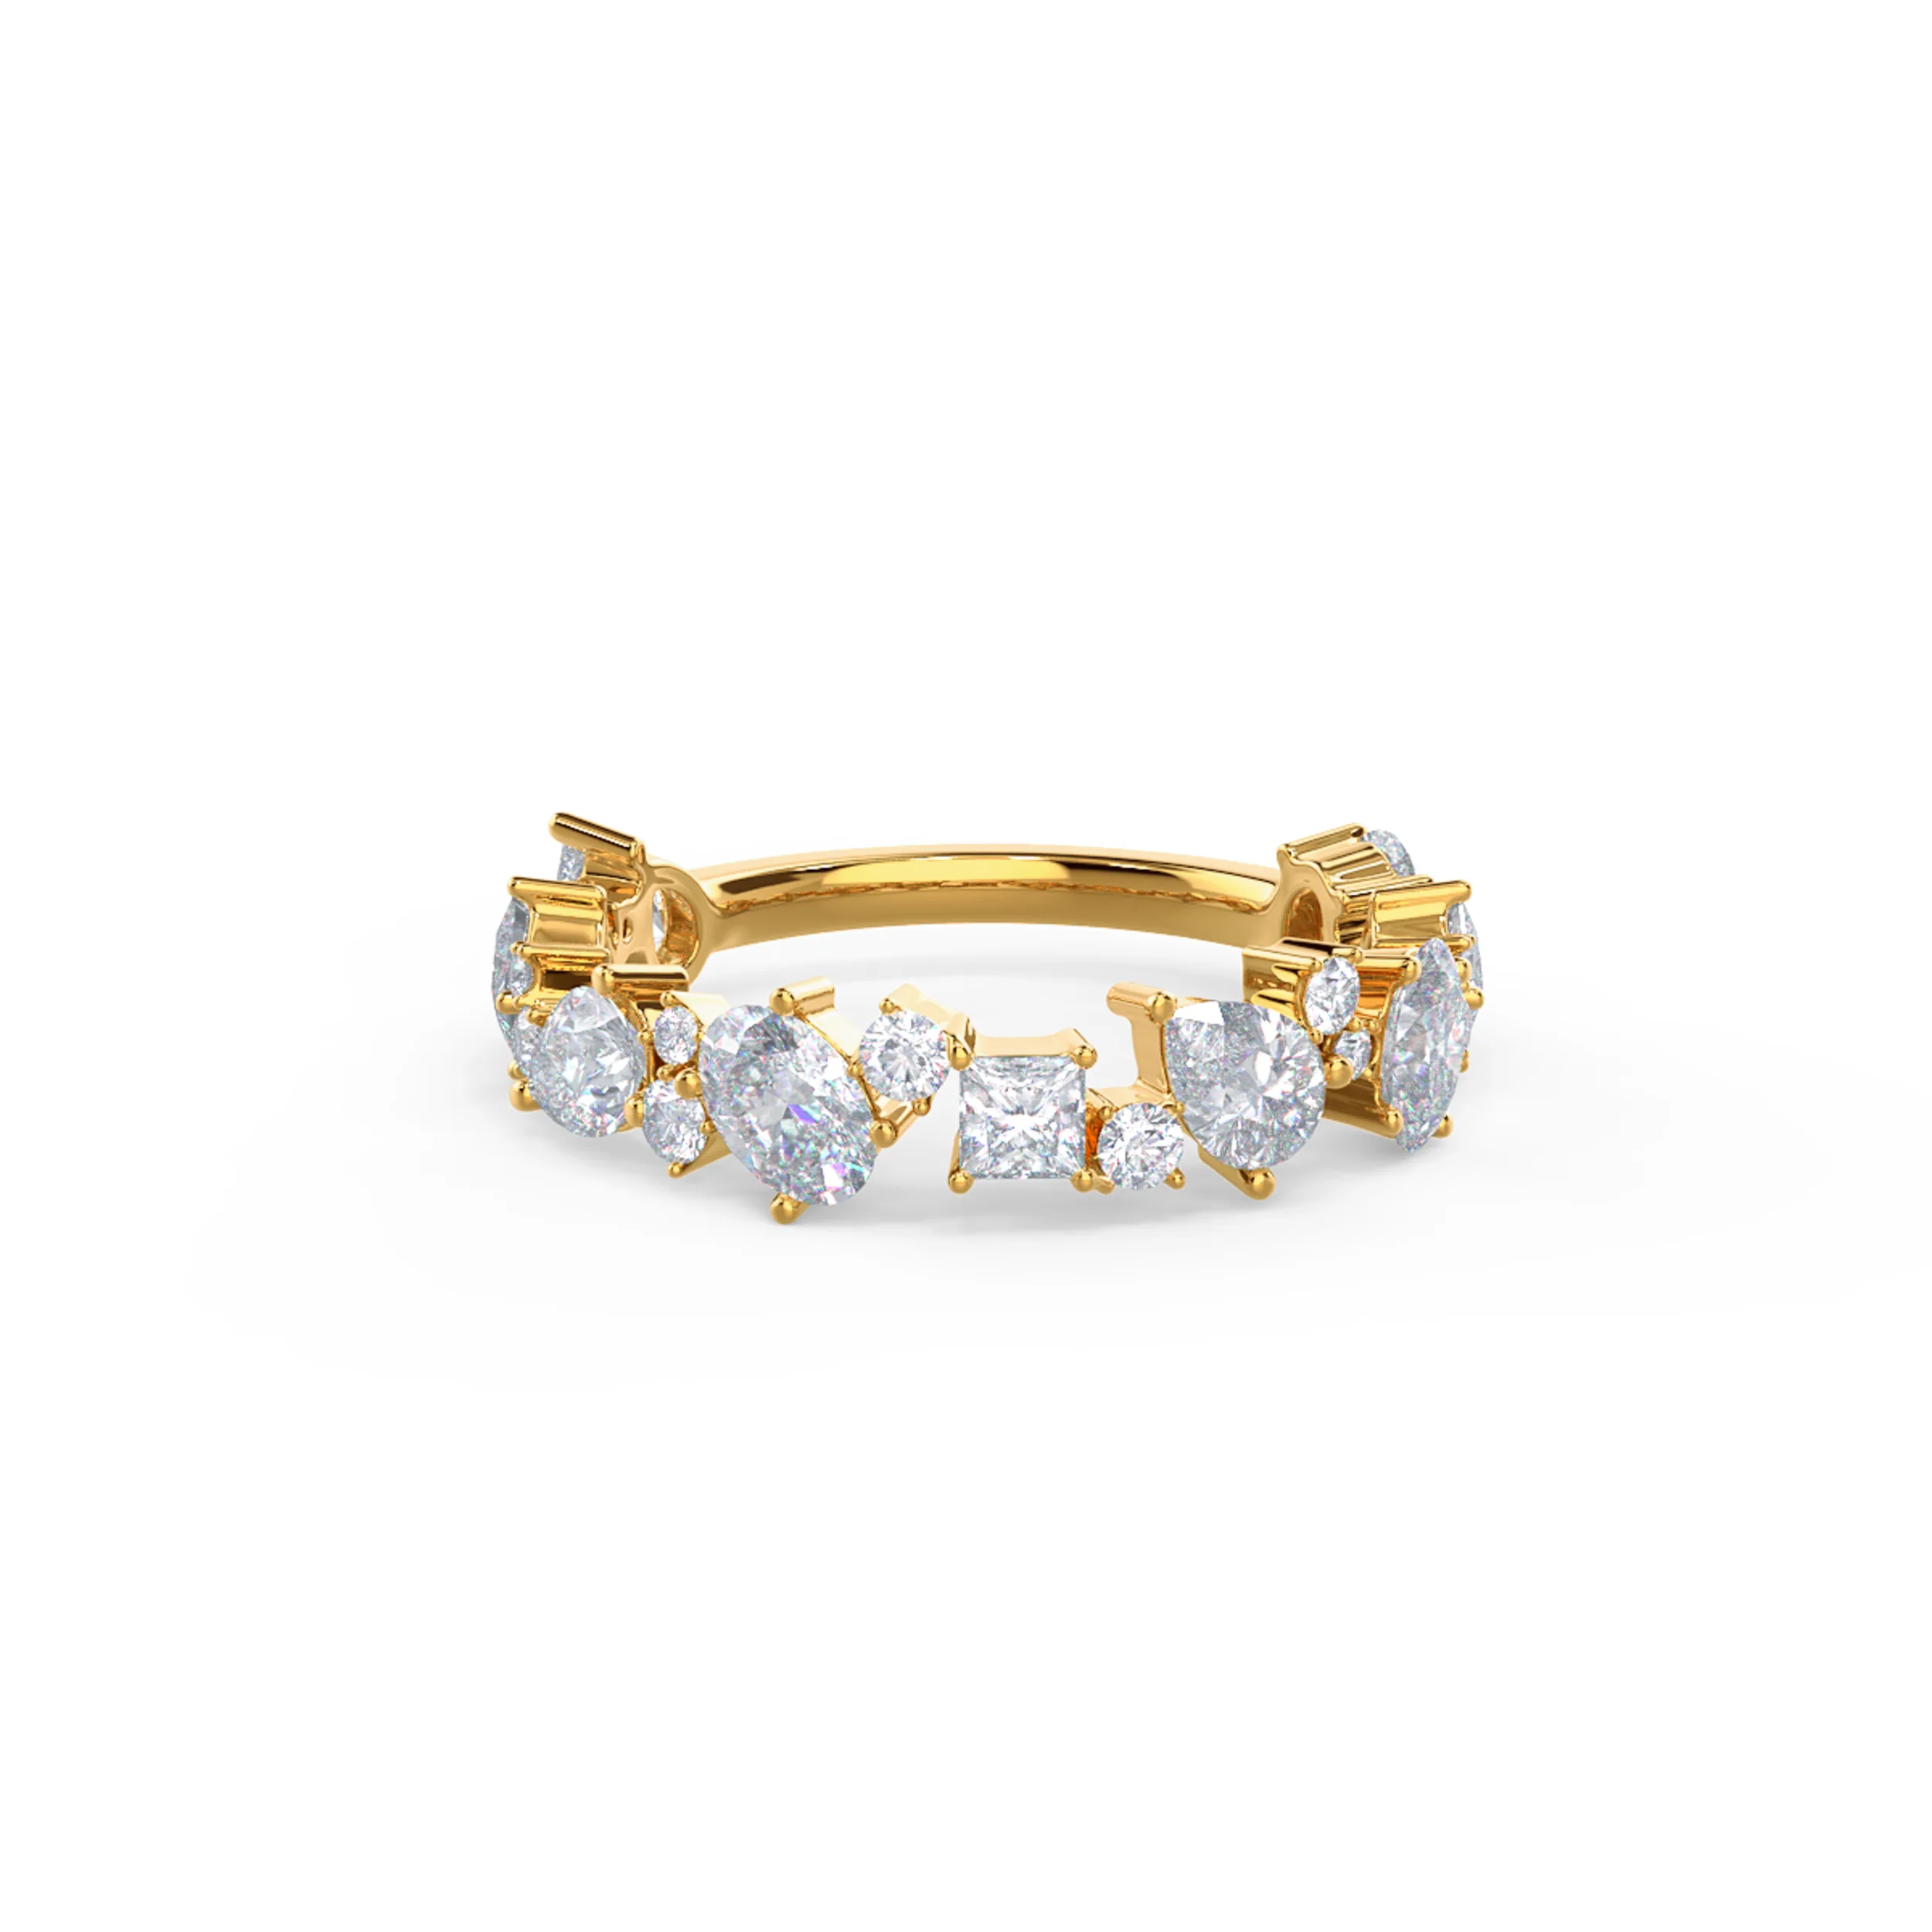 1.5 ct Diamonds set in Yellow Gold Kelsey Three Quarter Band (Main View)